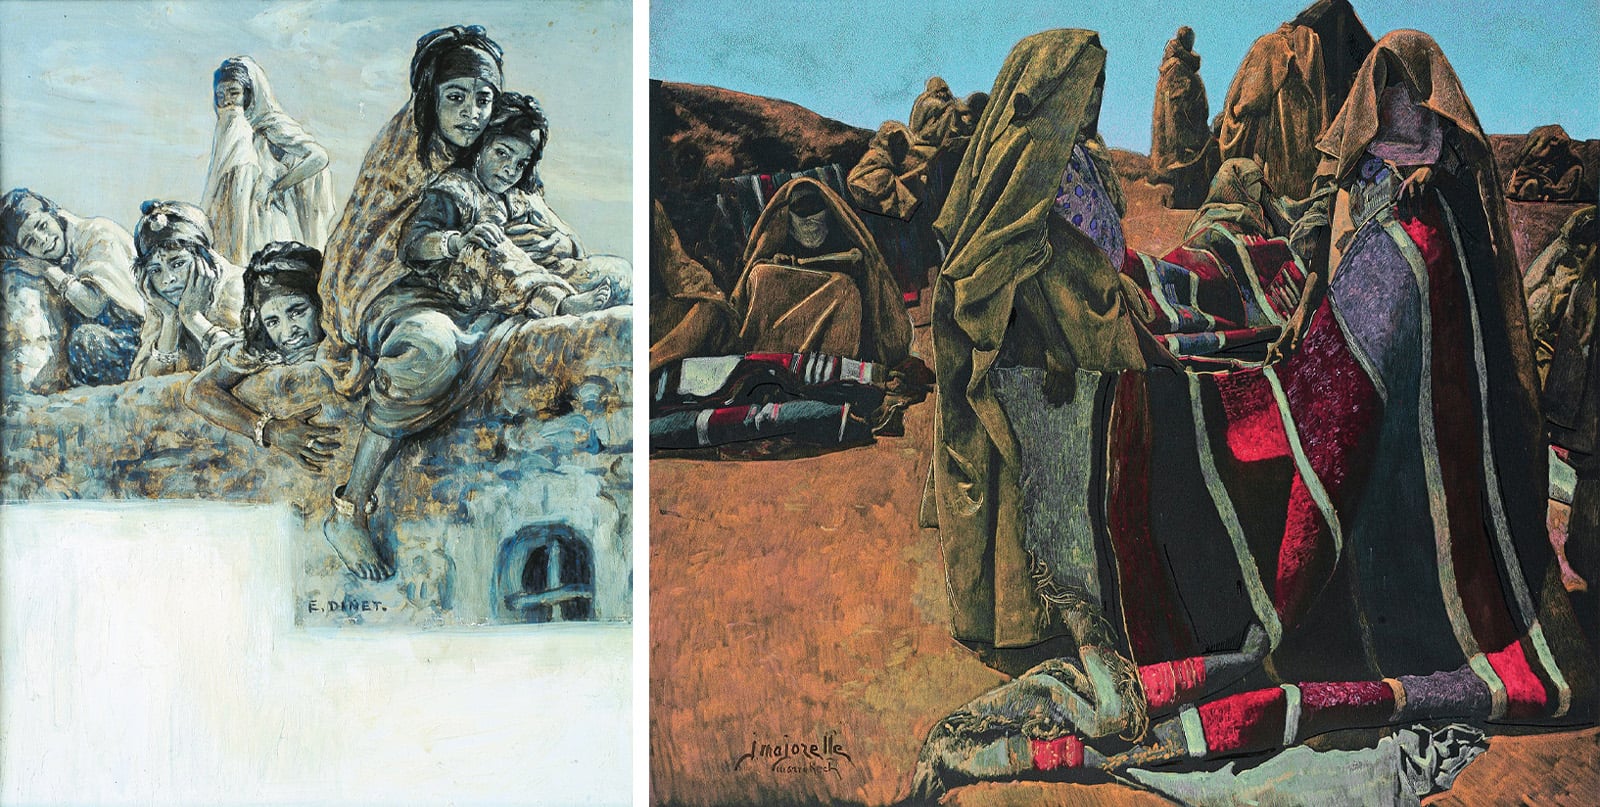 Left: Showing what collector Mohamed Shafik Gabr calls Étienne Dinet’s “intensity and softness of manner that invites the viewer to become a participant,” this grisaille, which the artist intended as an illustration for a book, shows six girls on a rooftop terrace enjoying celebrations in the street below. Right: One of the later Orientalists, Jacques Majorelle, from 1917 not only focused on everyday life, as in “Souq El-Khemis” (Friday Market), but also showed a modernist fascination with color, pattern and texture. 